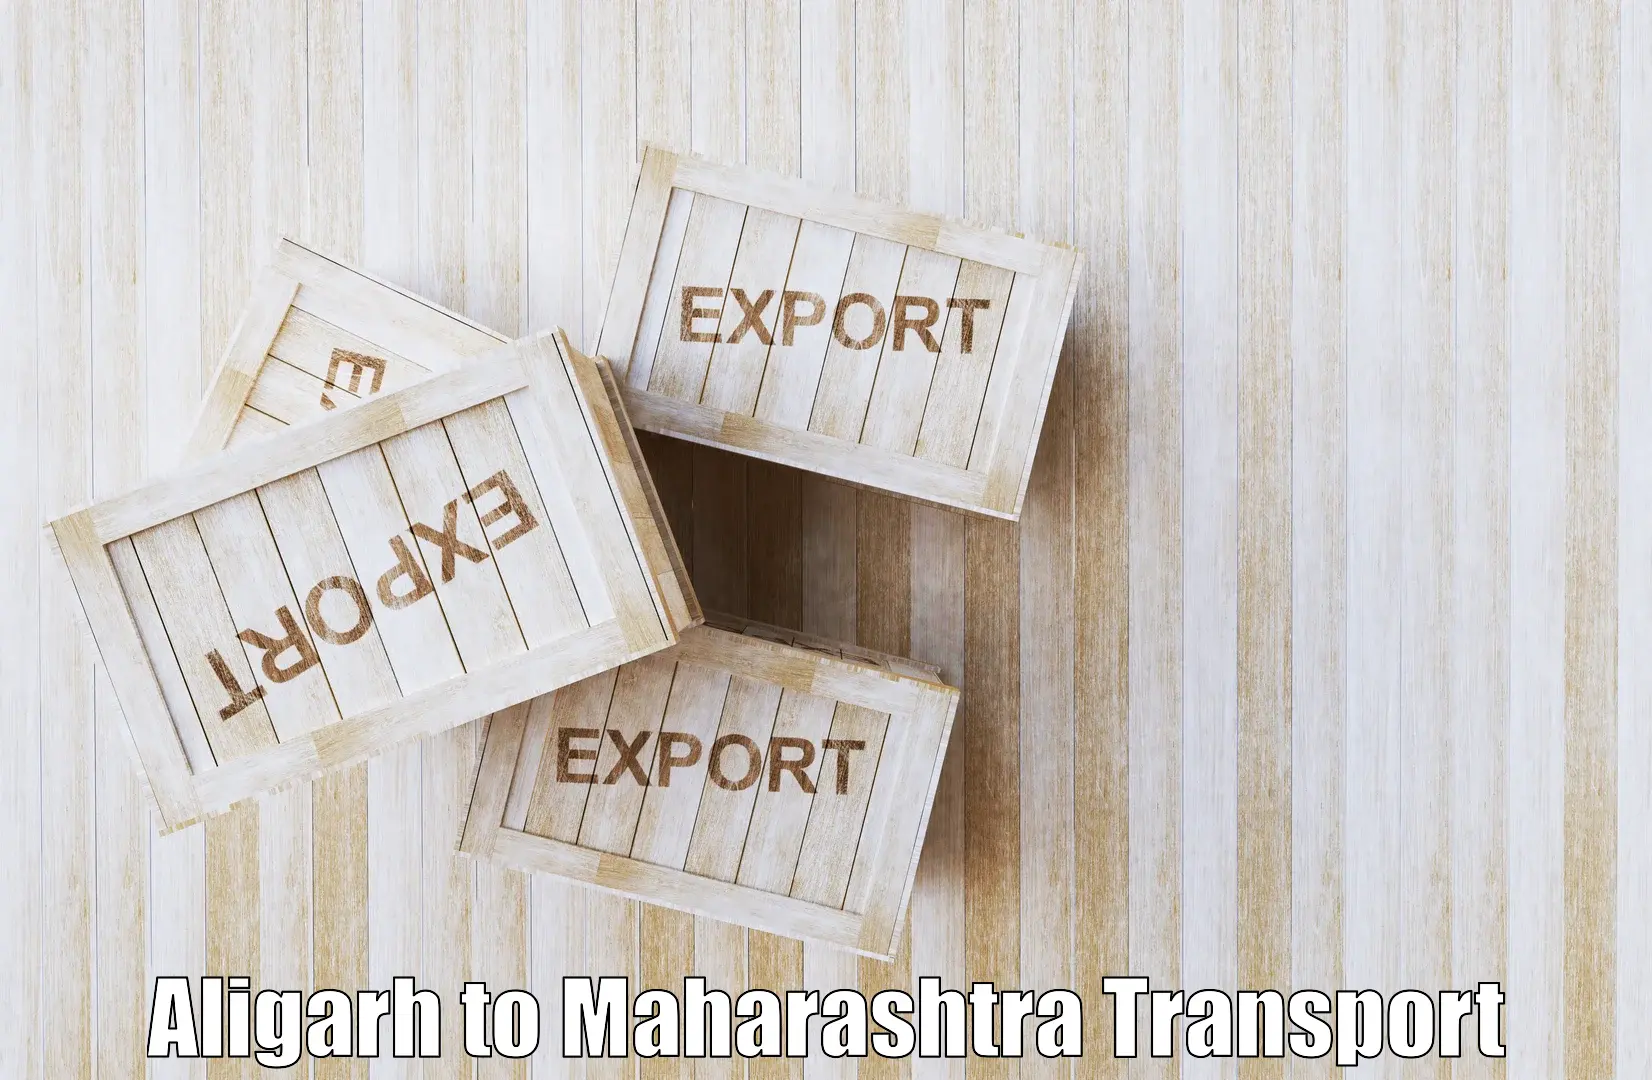 Road transport online services Aligarh to DY Patil Vidyapeeth Pune